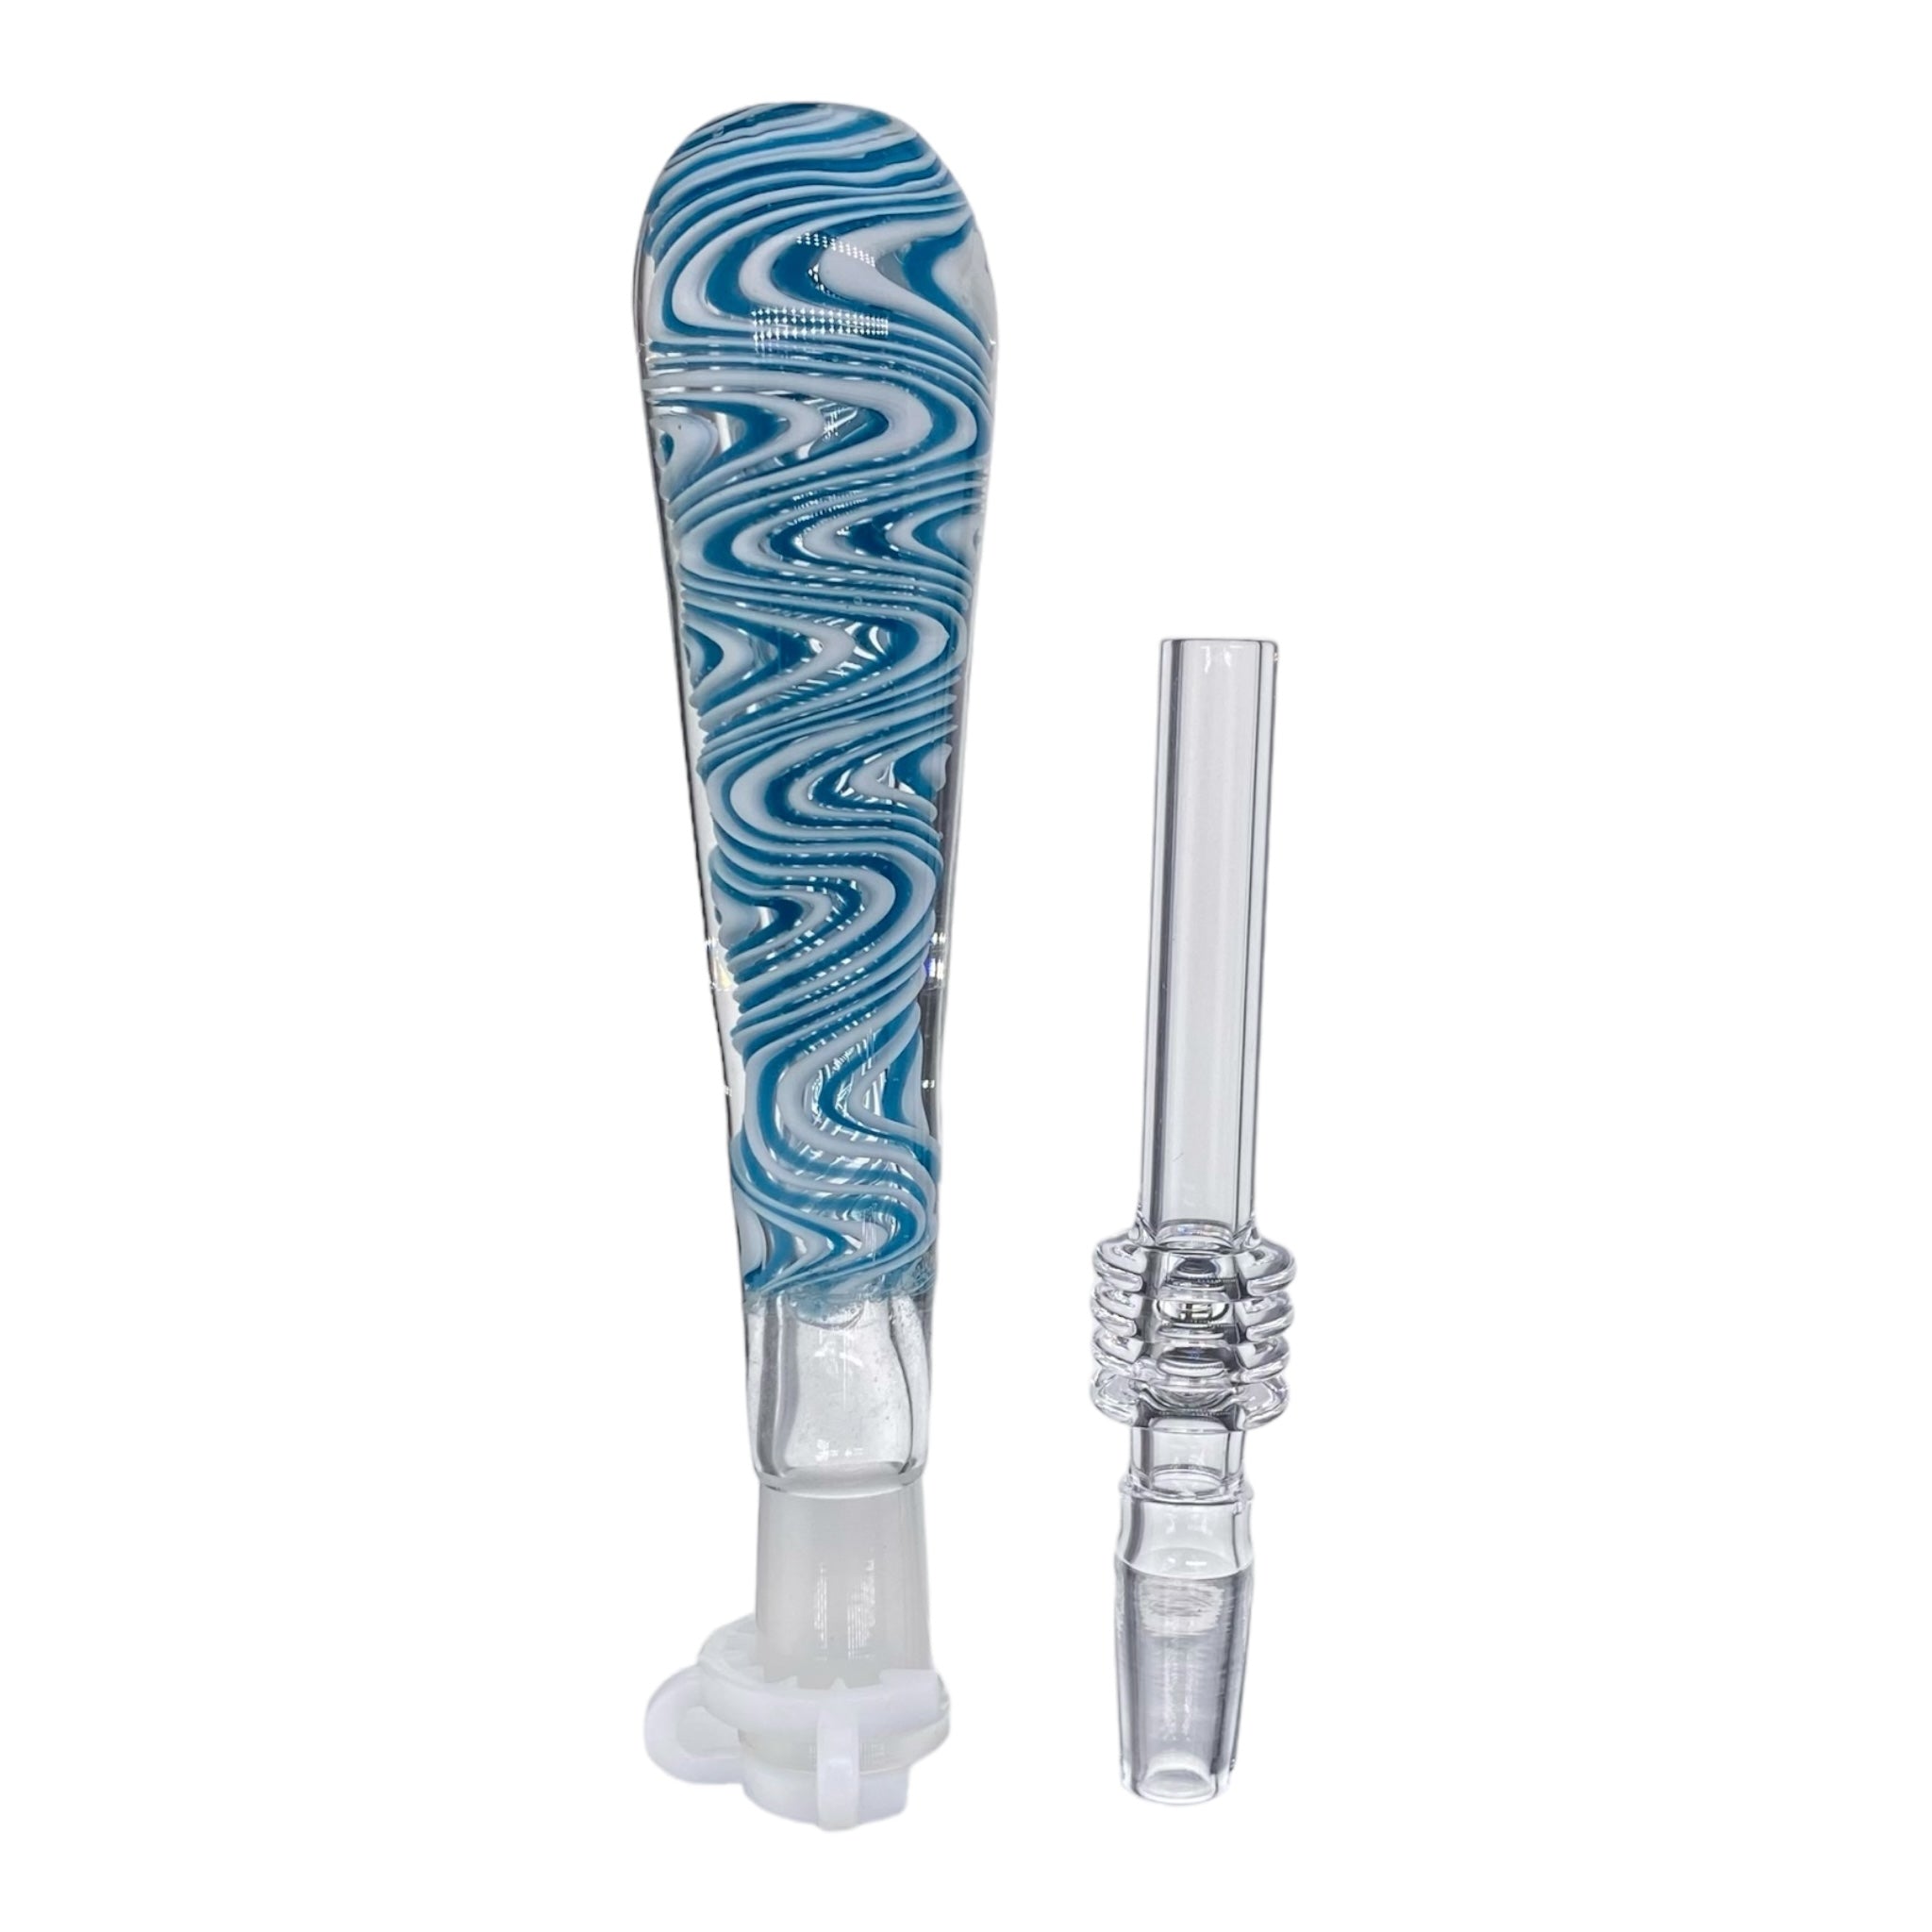 10mm Nectar Collector - Blue And White Linework Inside Out With 10mm Quartz Tip